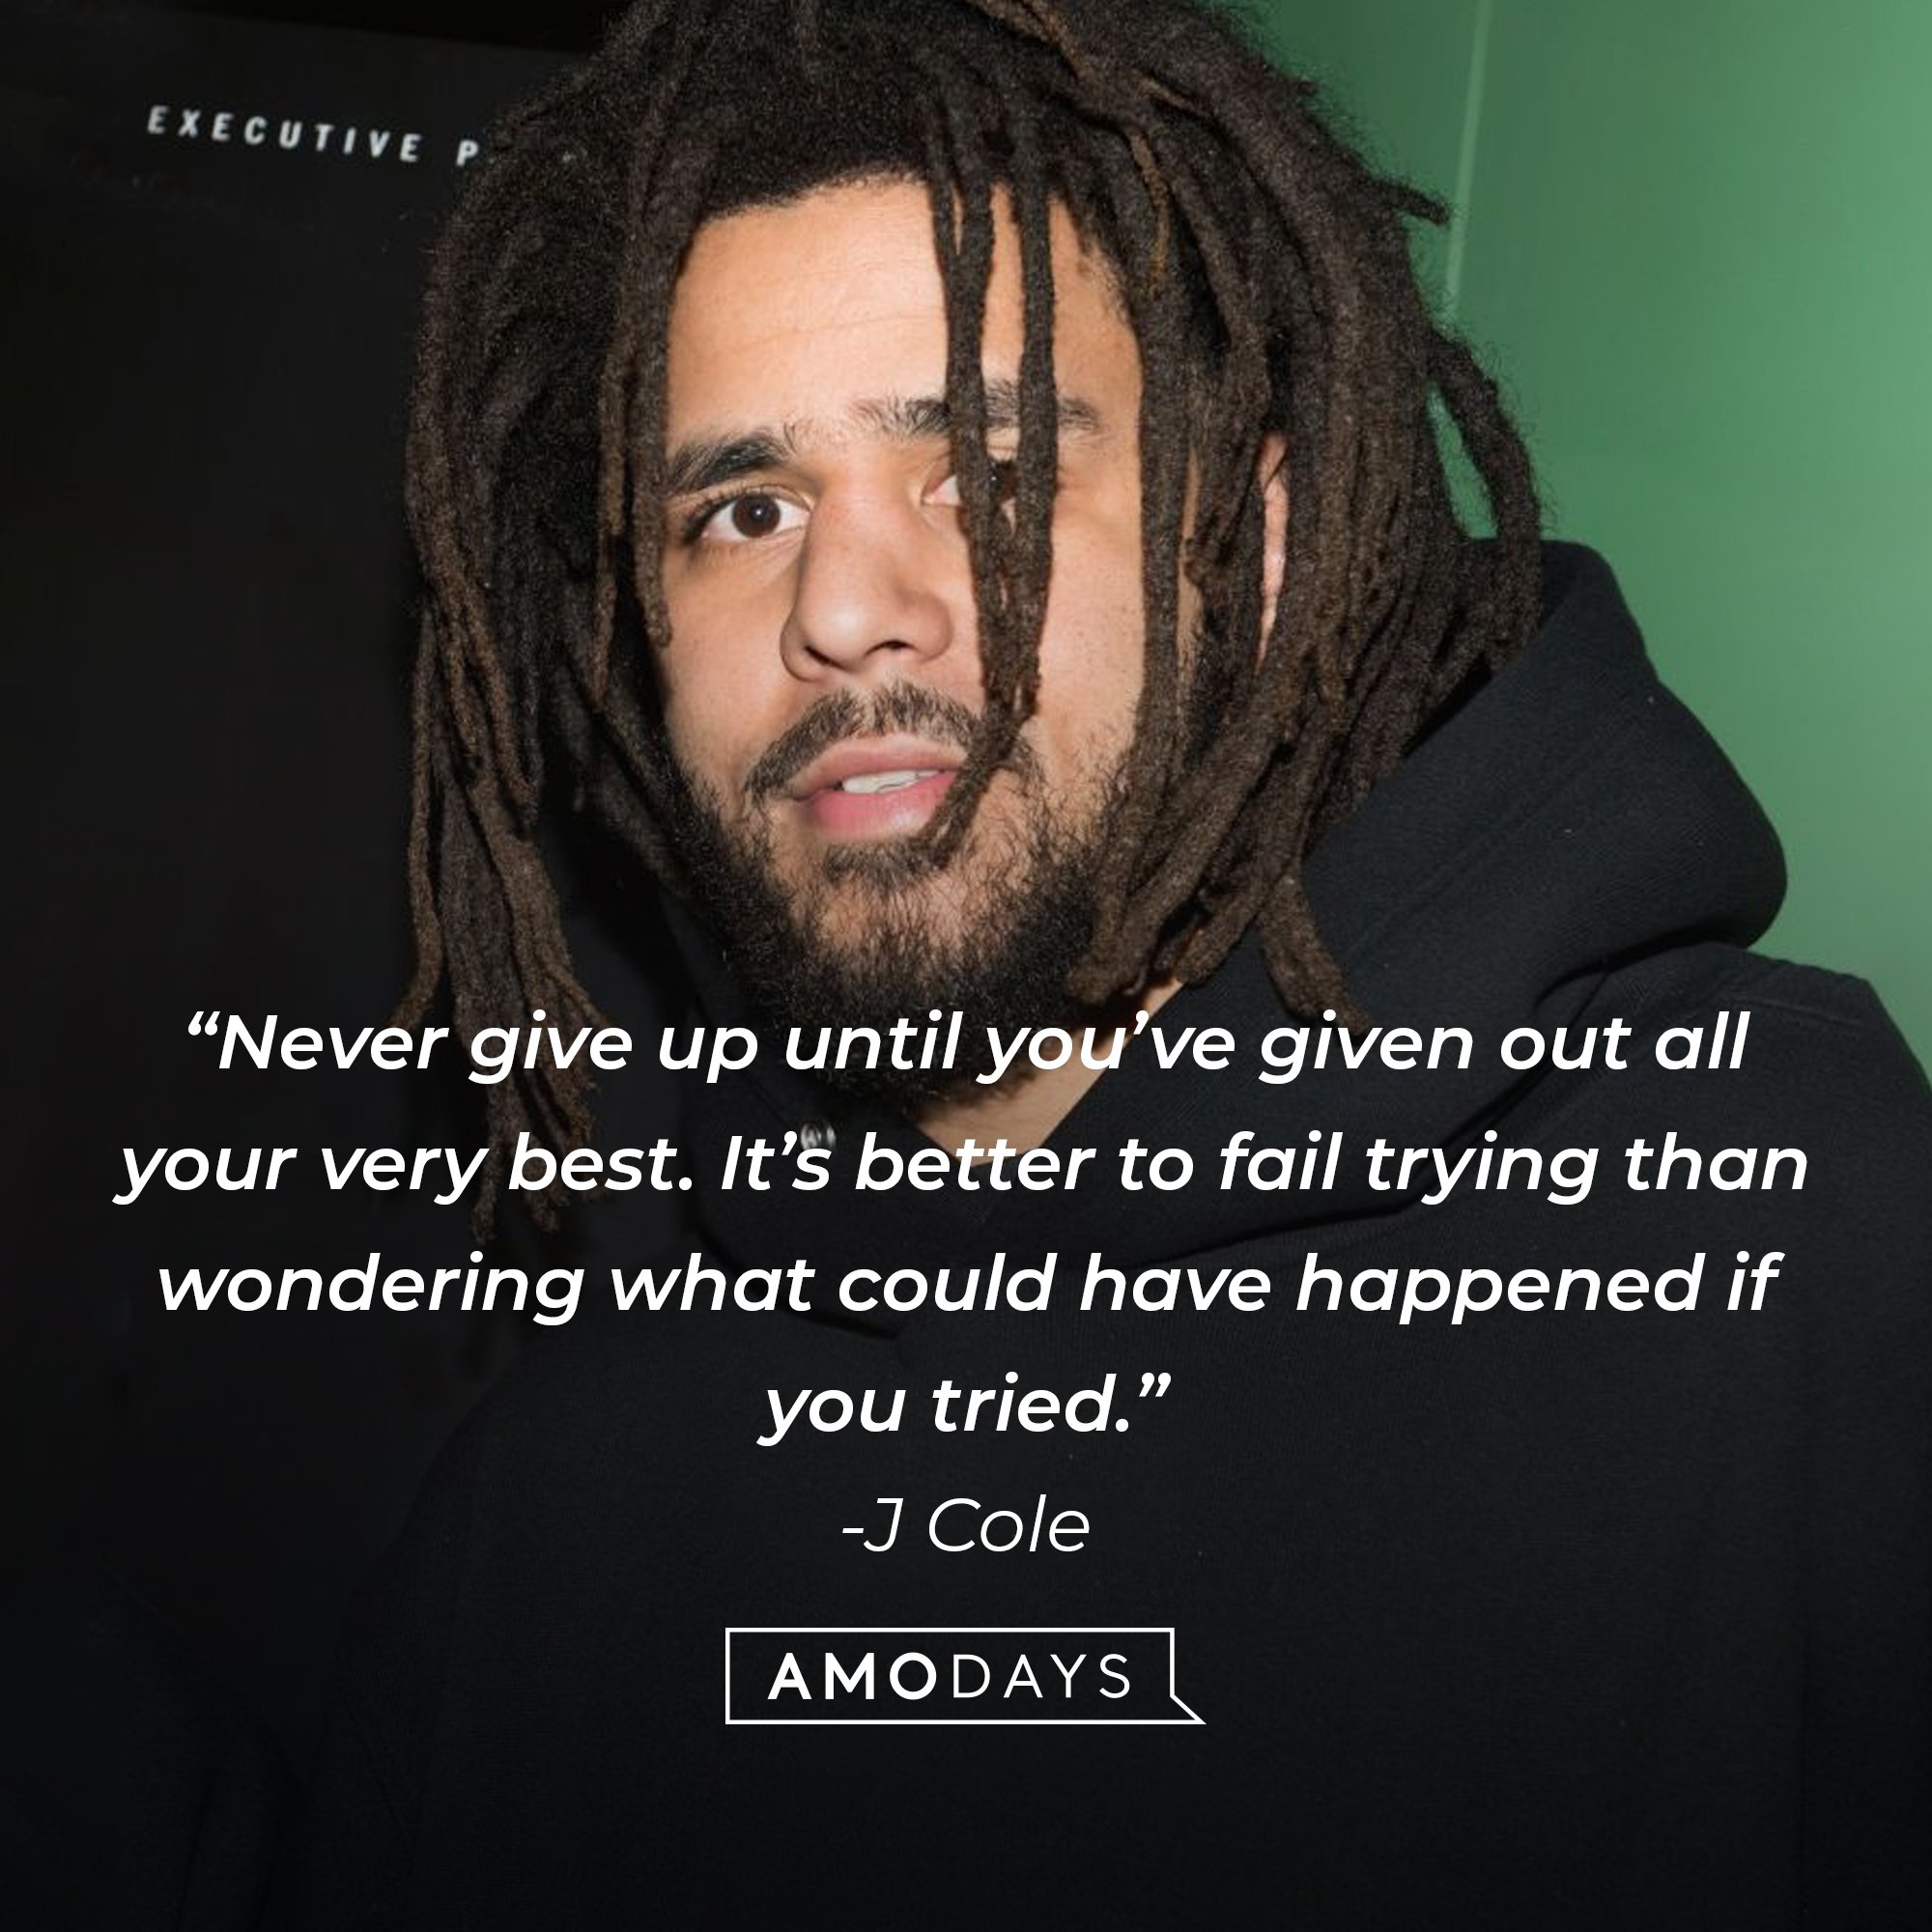 J Cole's quote: “Never give up until you’ve given out all your very best. It’s better to fail trying than wondering what could have happened if you tried.” | Image: AmoDays